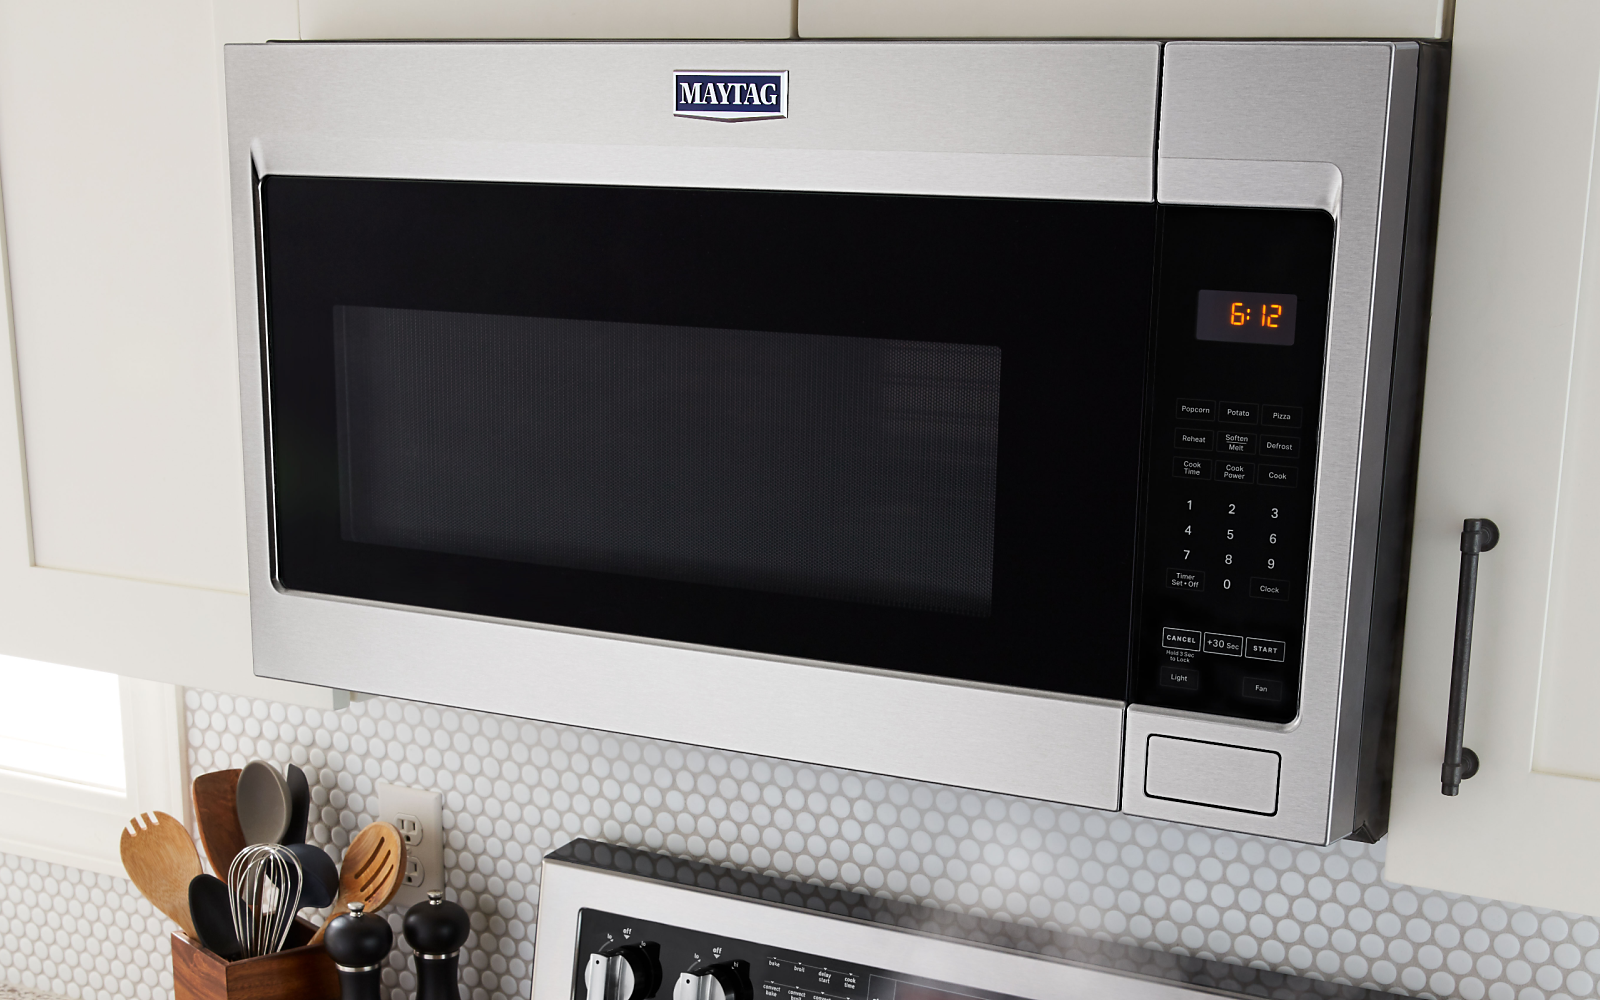 Maytag® stainless steel microwave between white cabinets